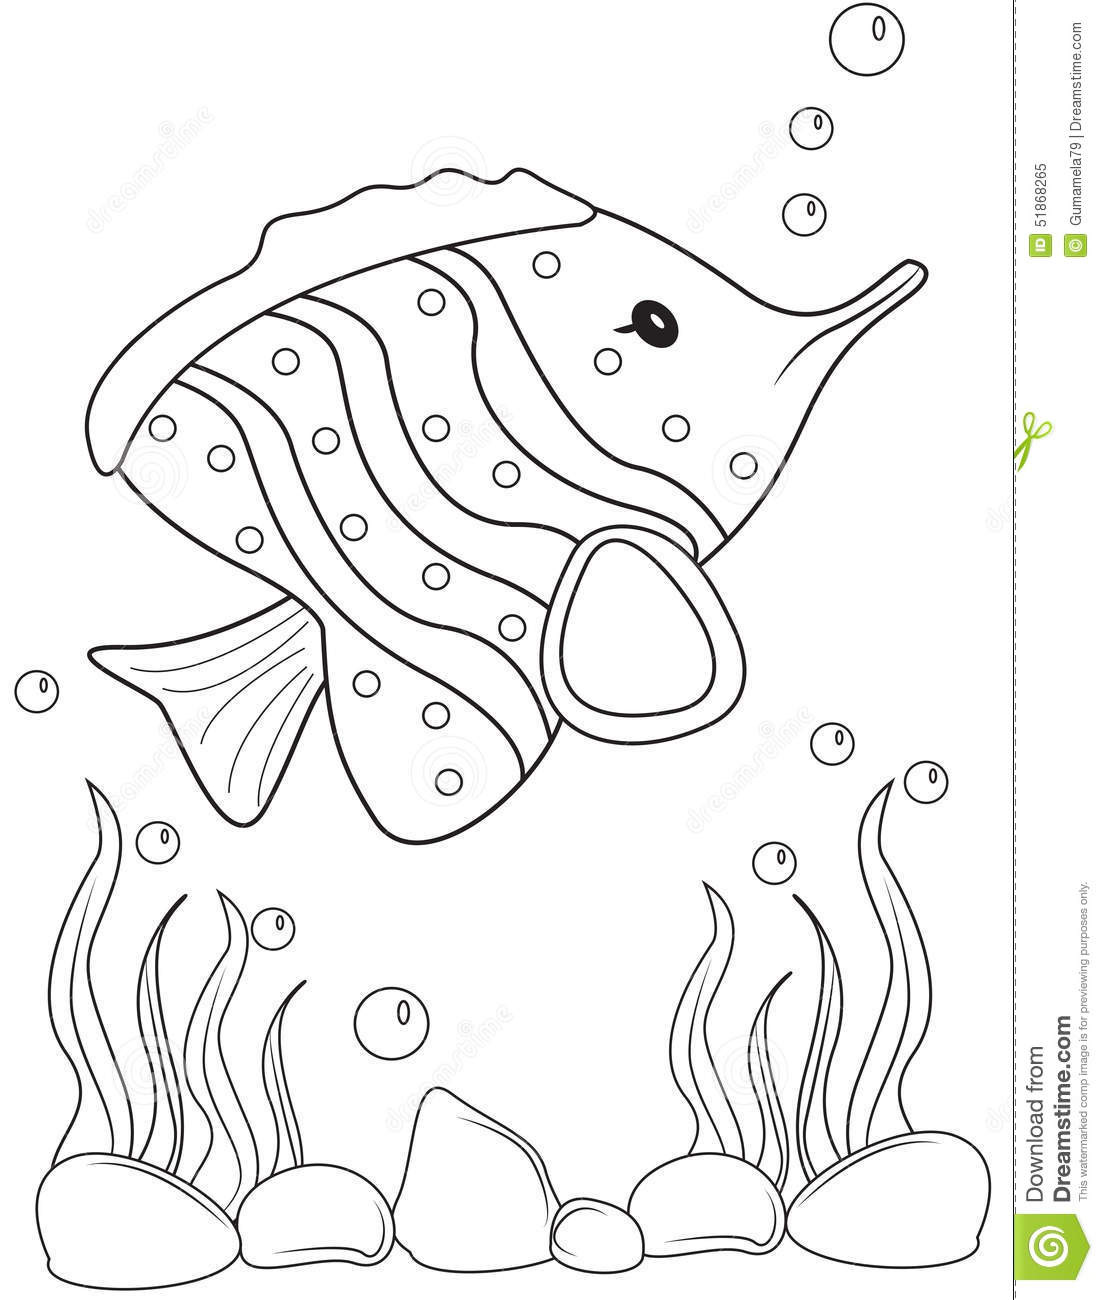 Kids Coloring Book Pages
 Fish coloring page stock illustration Illustration of